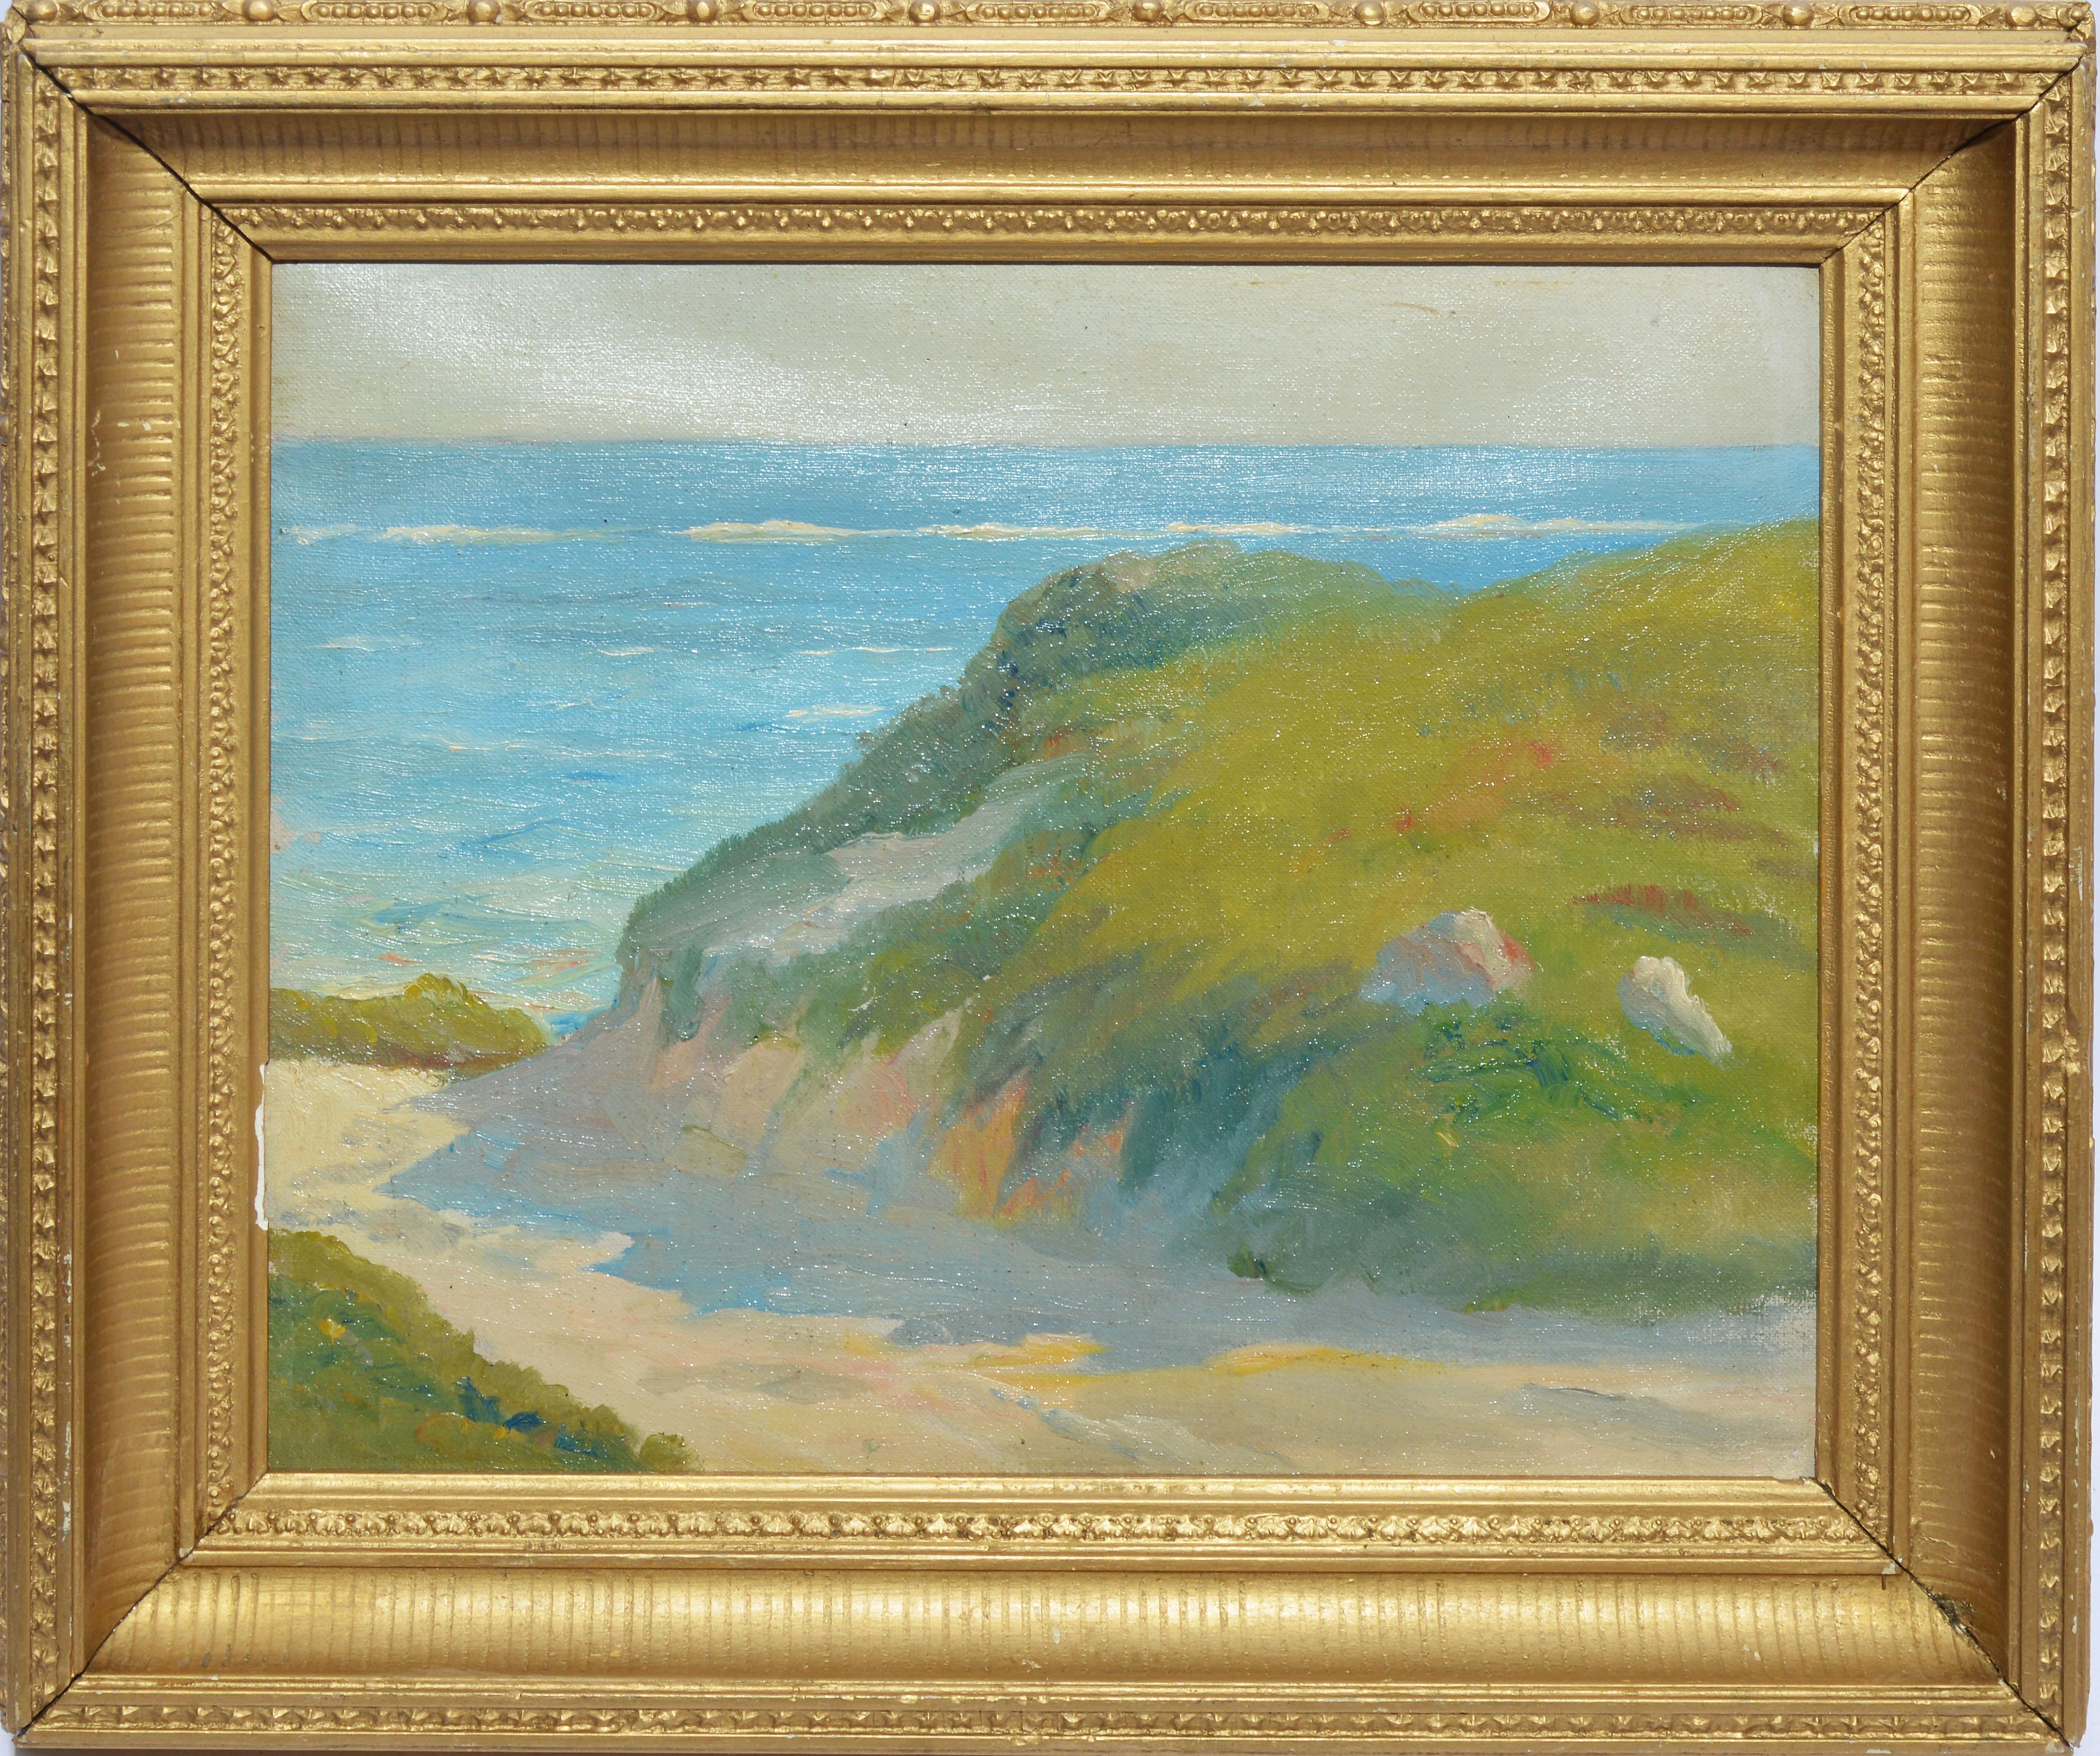 Walter G. Cleveland Landscape Painting - Antique Impressionist Hamptons Beach Seascape Oil Painting by Walter Cleveland